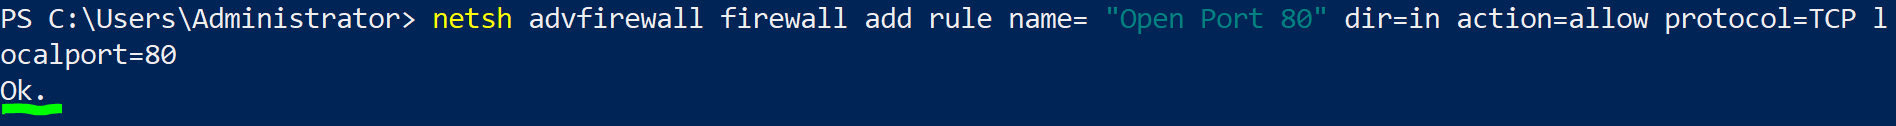 Opening Ports by Adding Firewall Rule